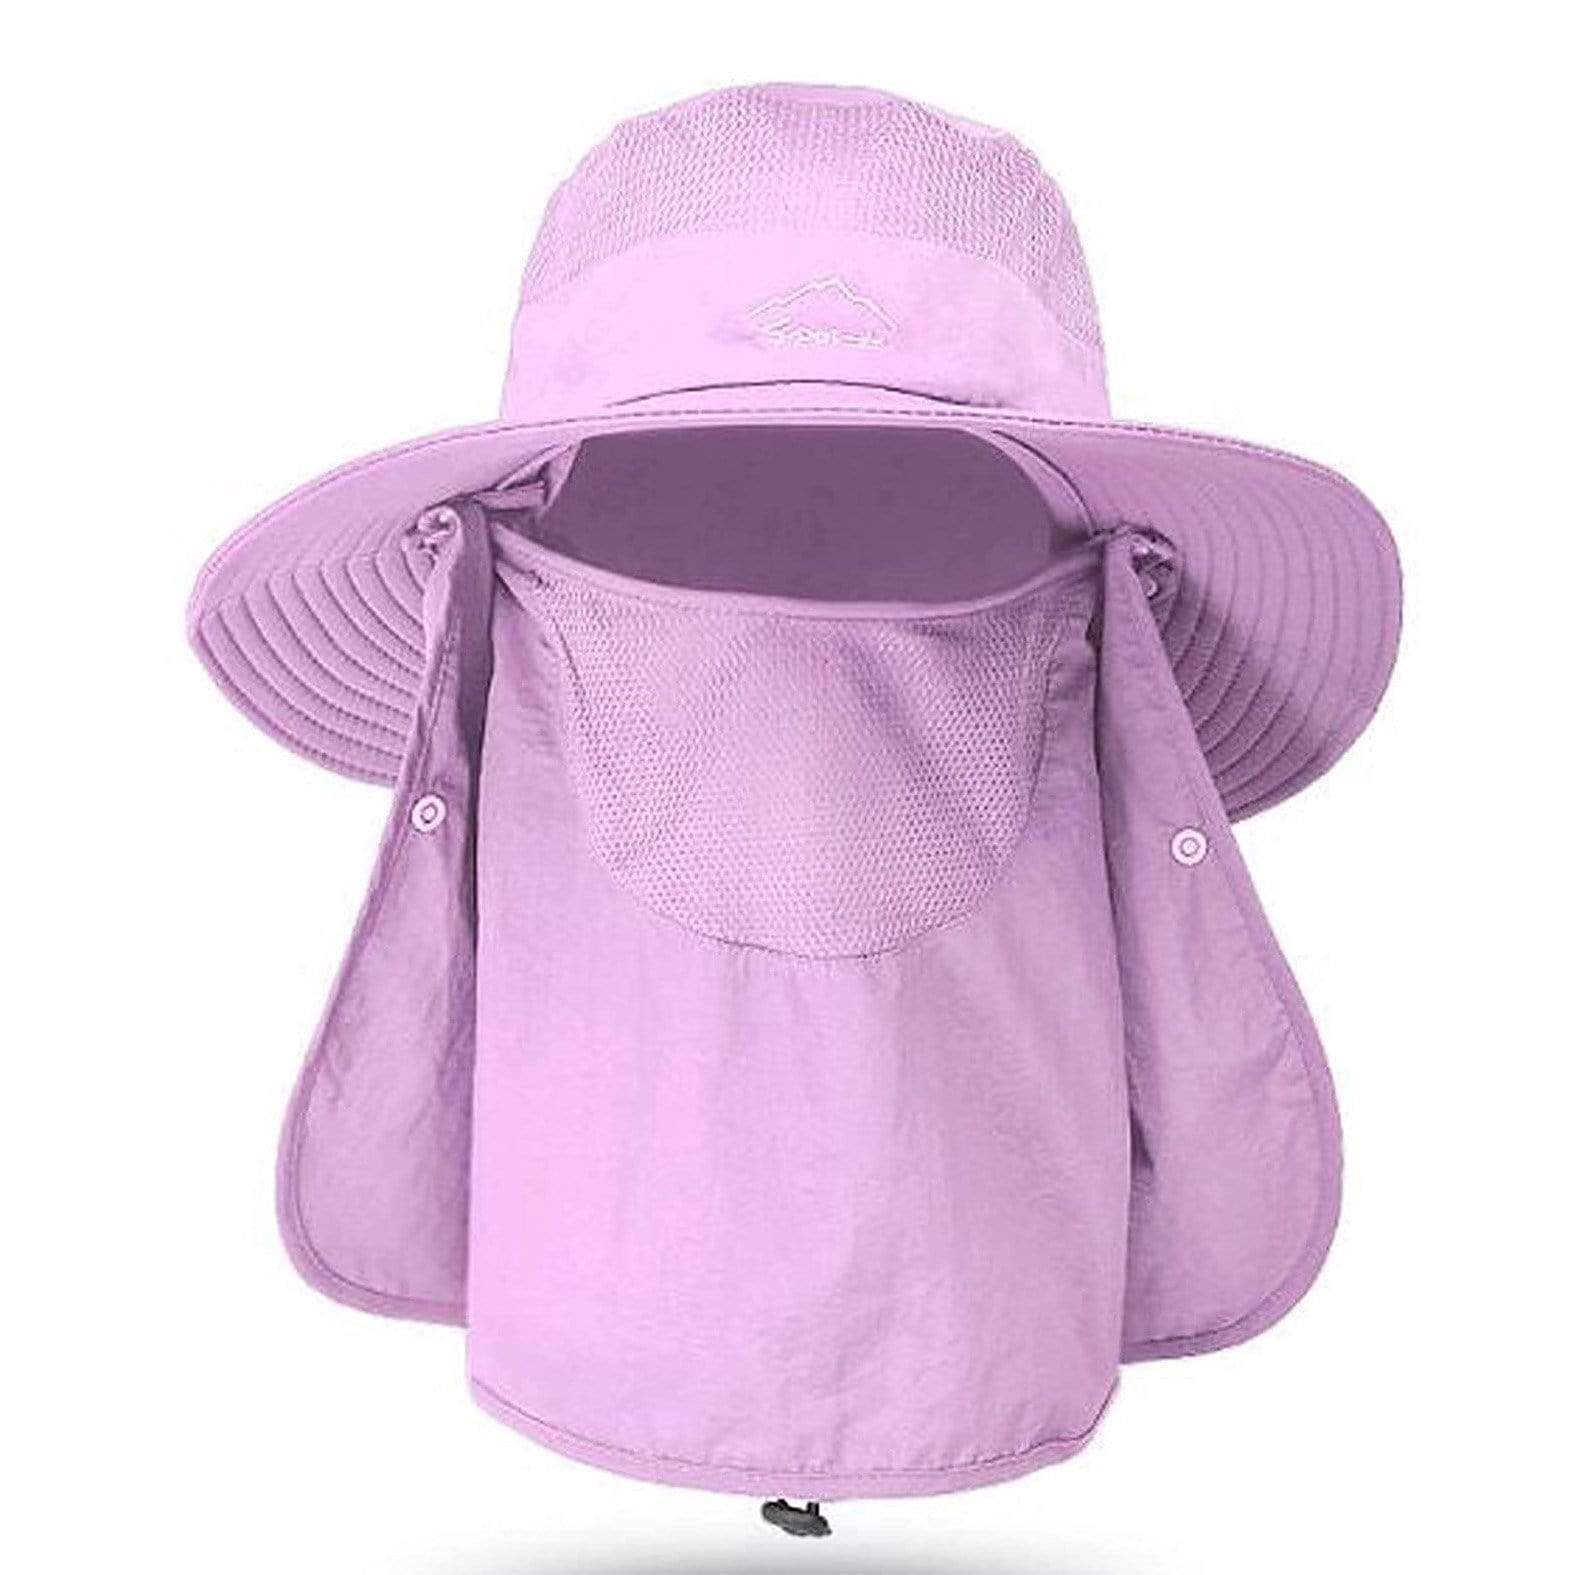 Fishing Hat Sun Cap with Removable Face Neck Cover Fishing Hat Purple MIERSPORTS